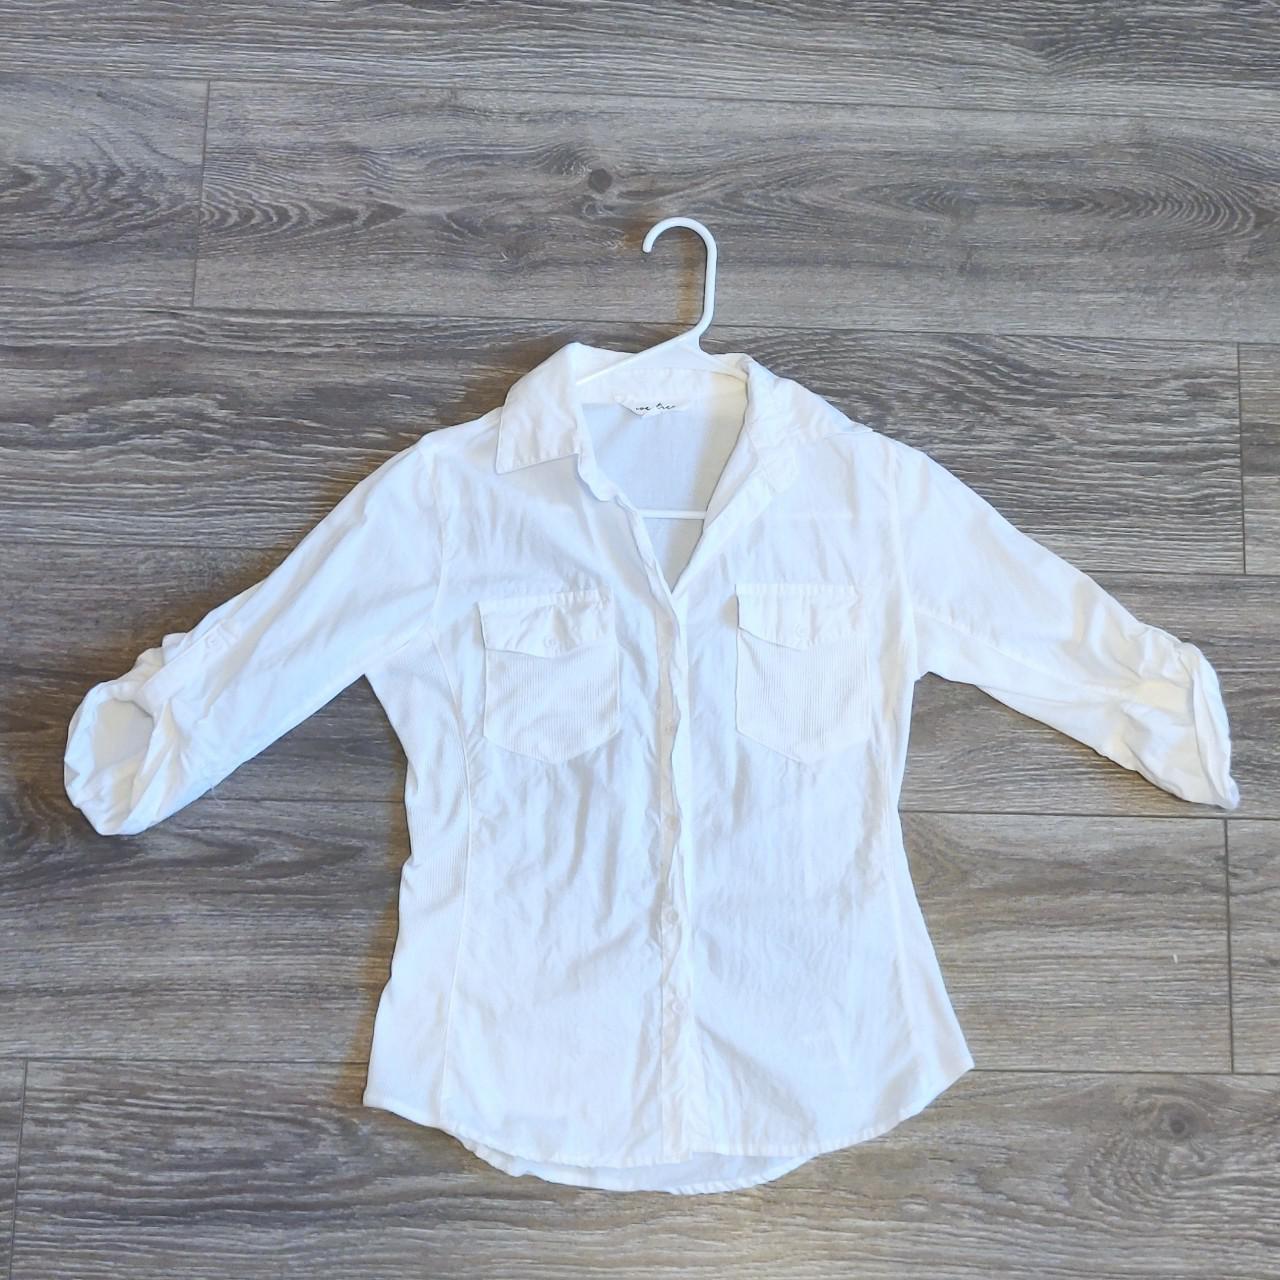 Product Image 1 - 3/4 Sleeve White Button Up
Contact